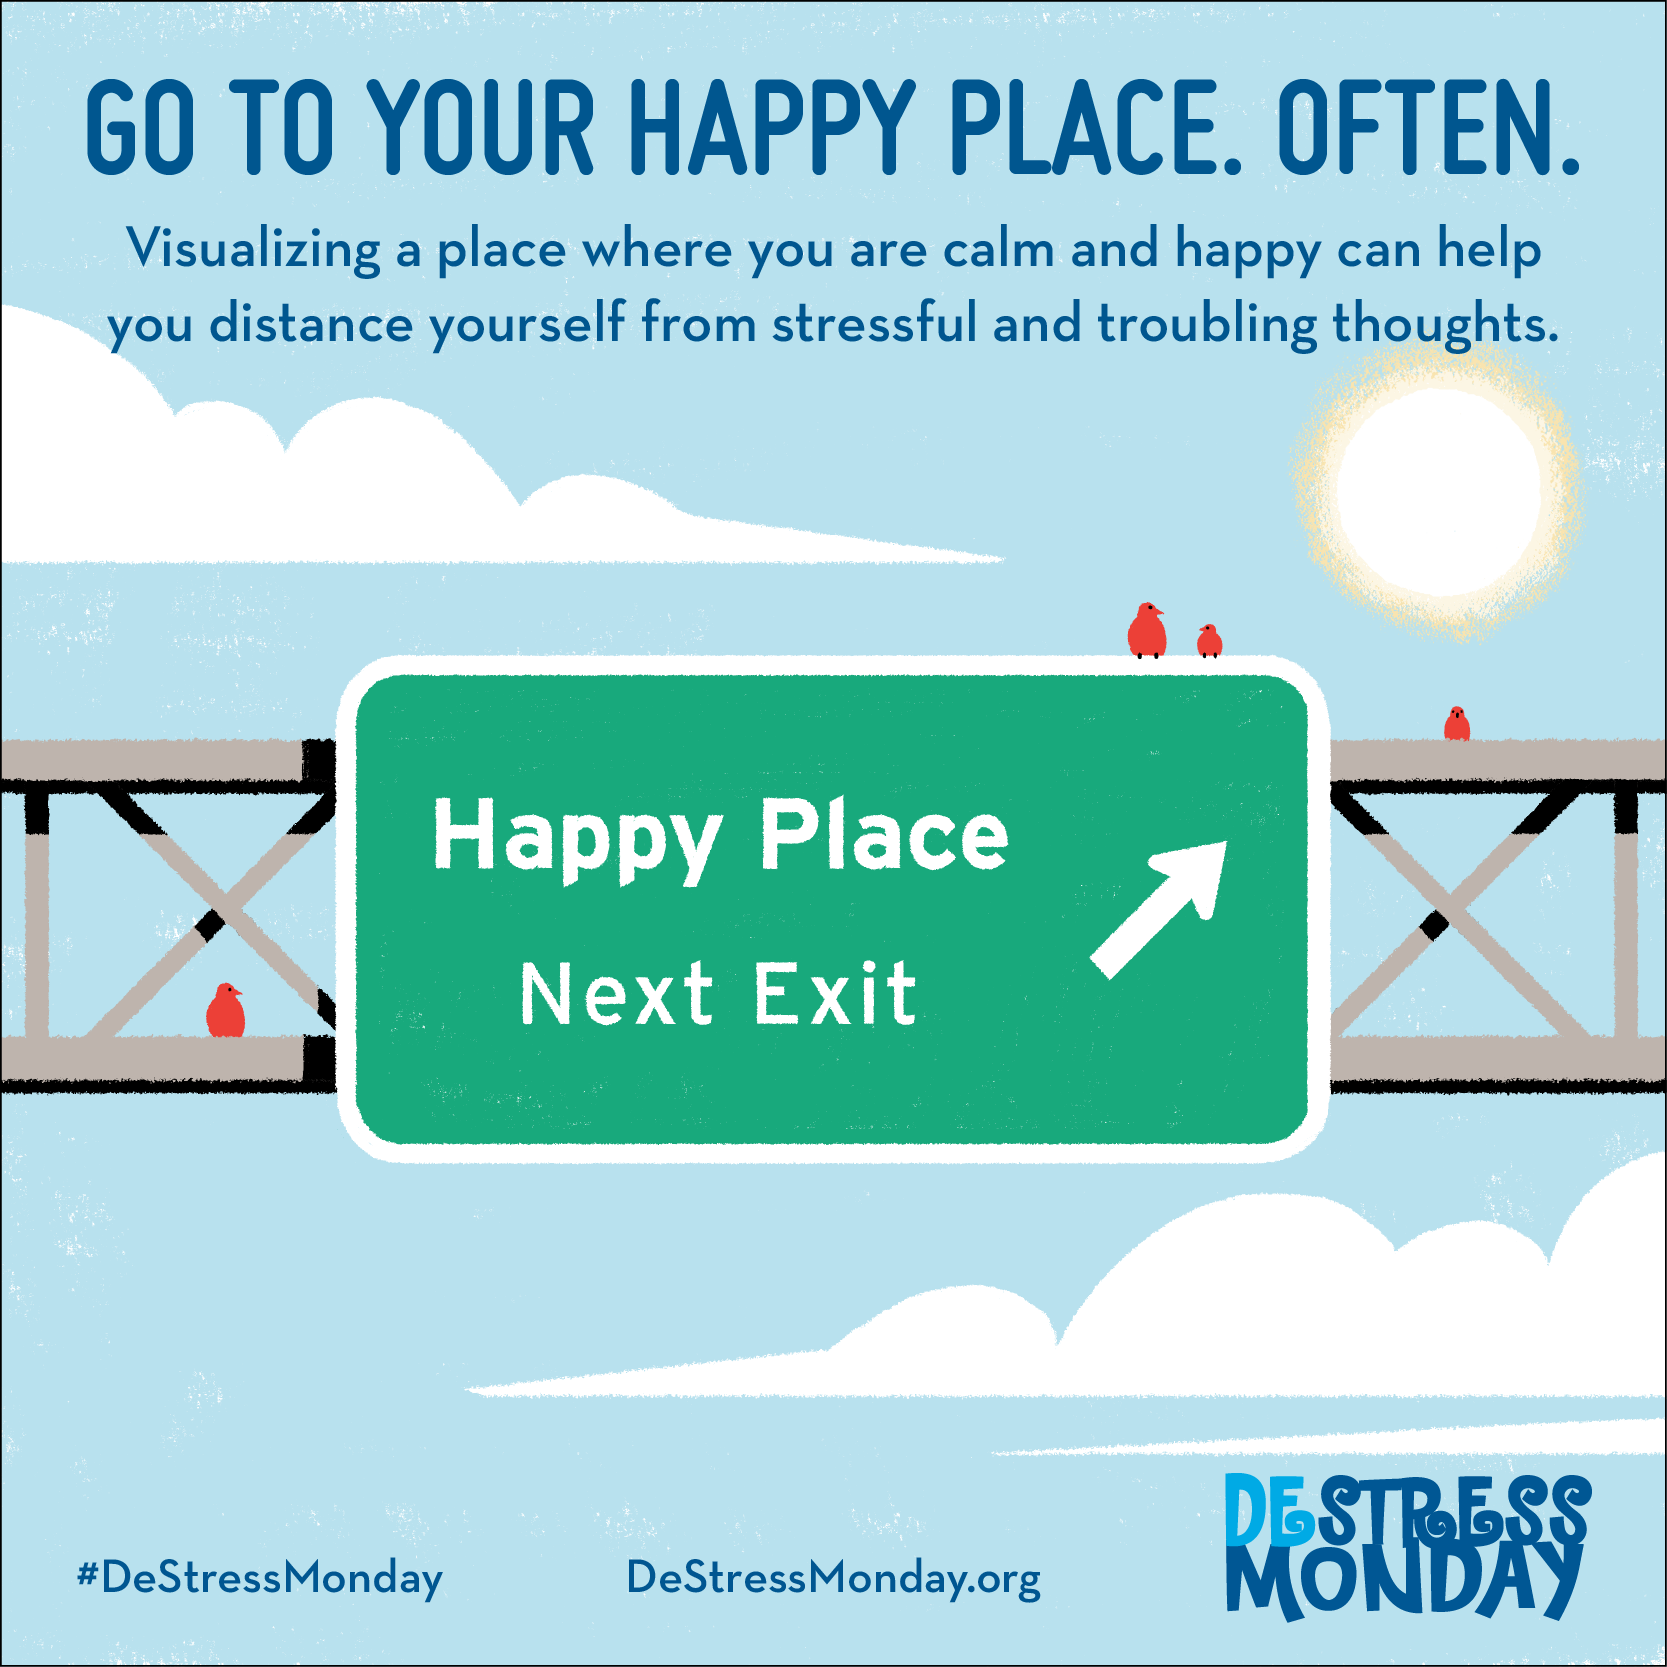 Find Your Happy Place this DeStress Monday with this Simple Meditation